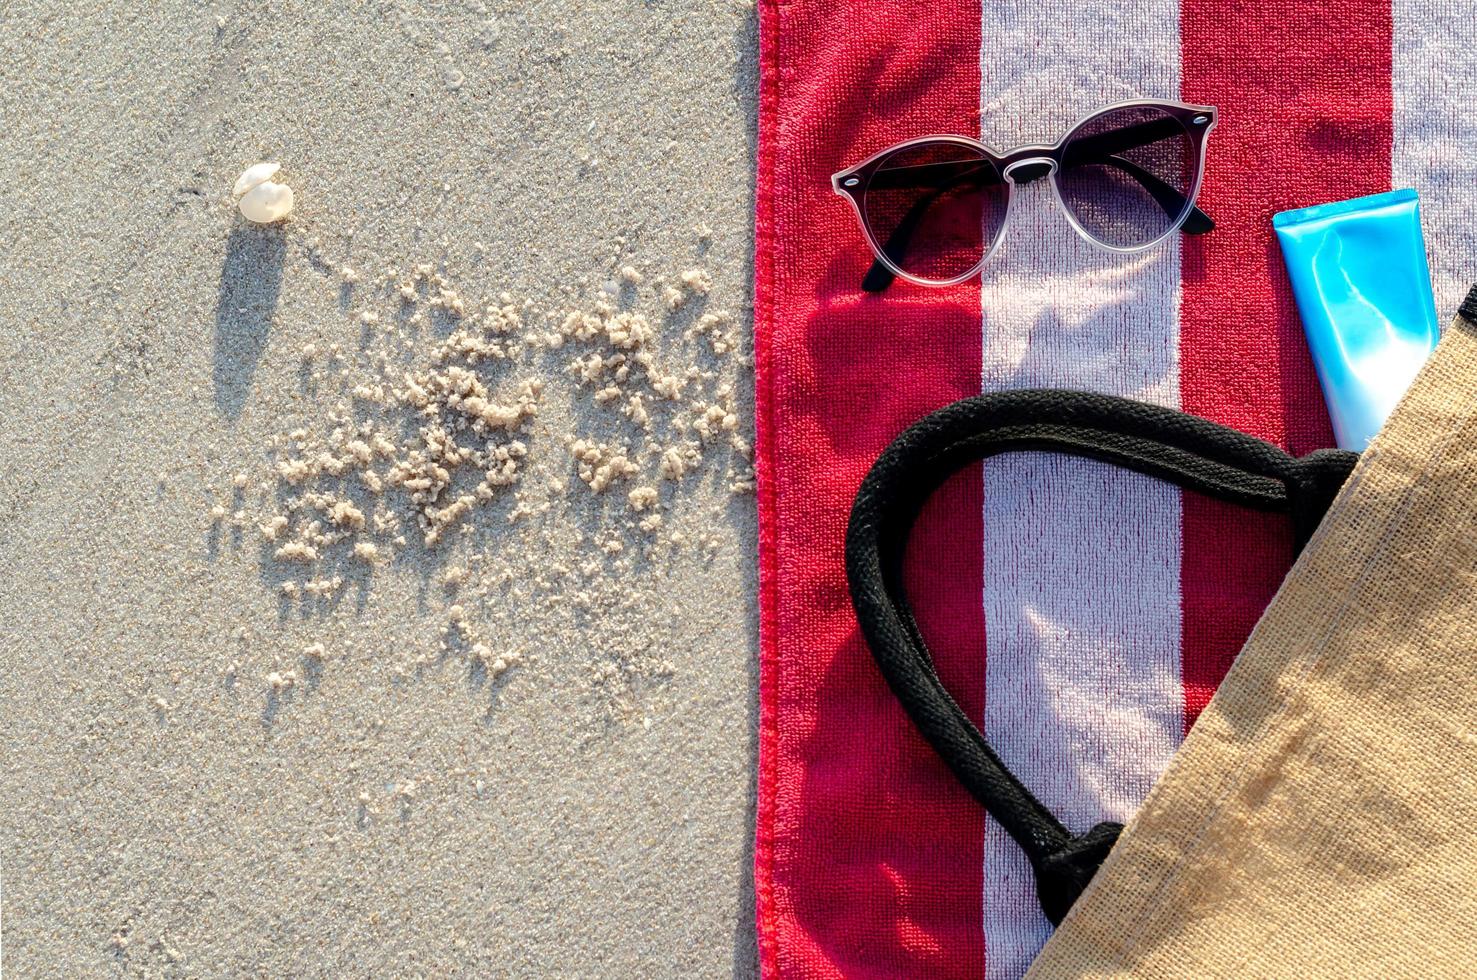 Sunglasses with sunscreen lotion and bag on red towel. photo